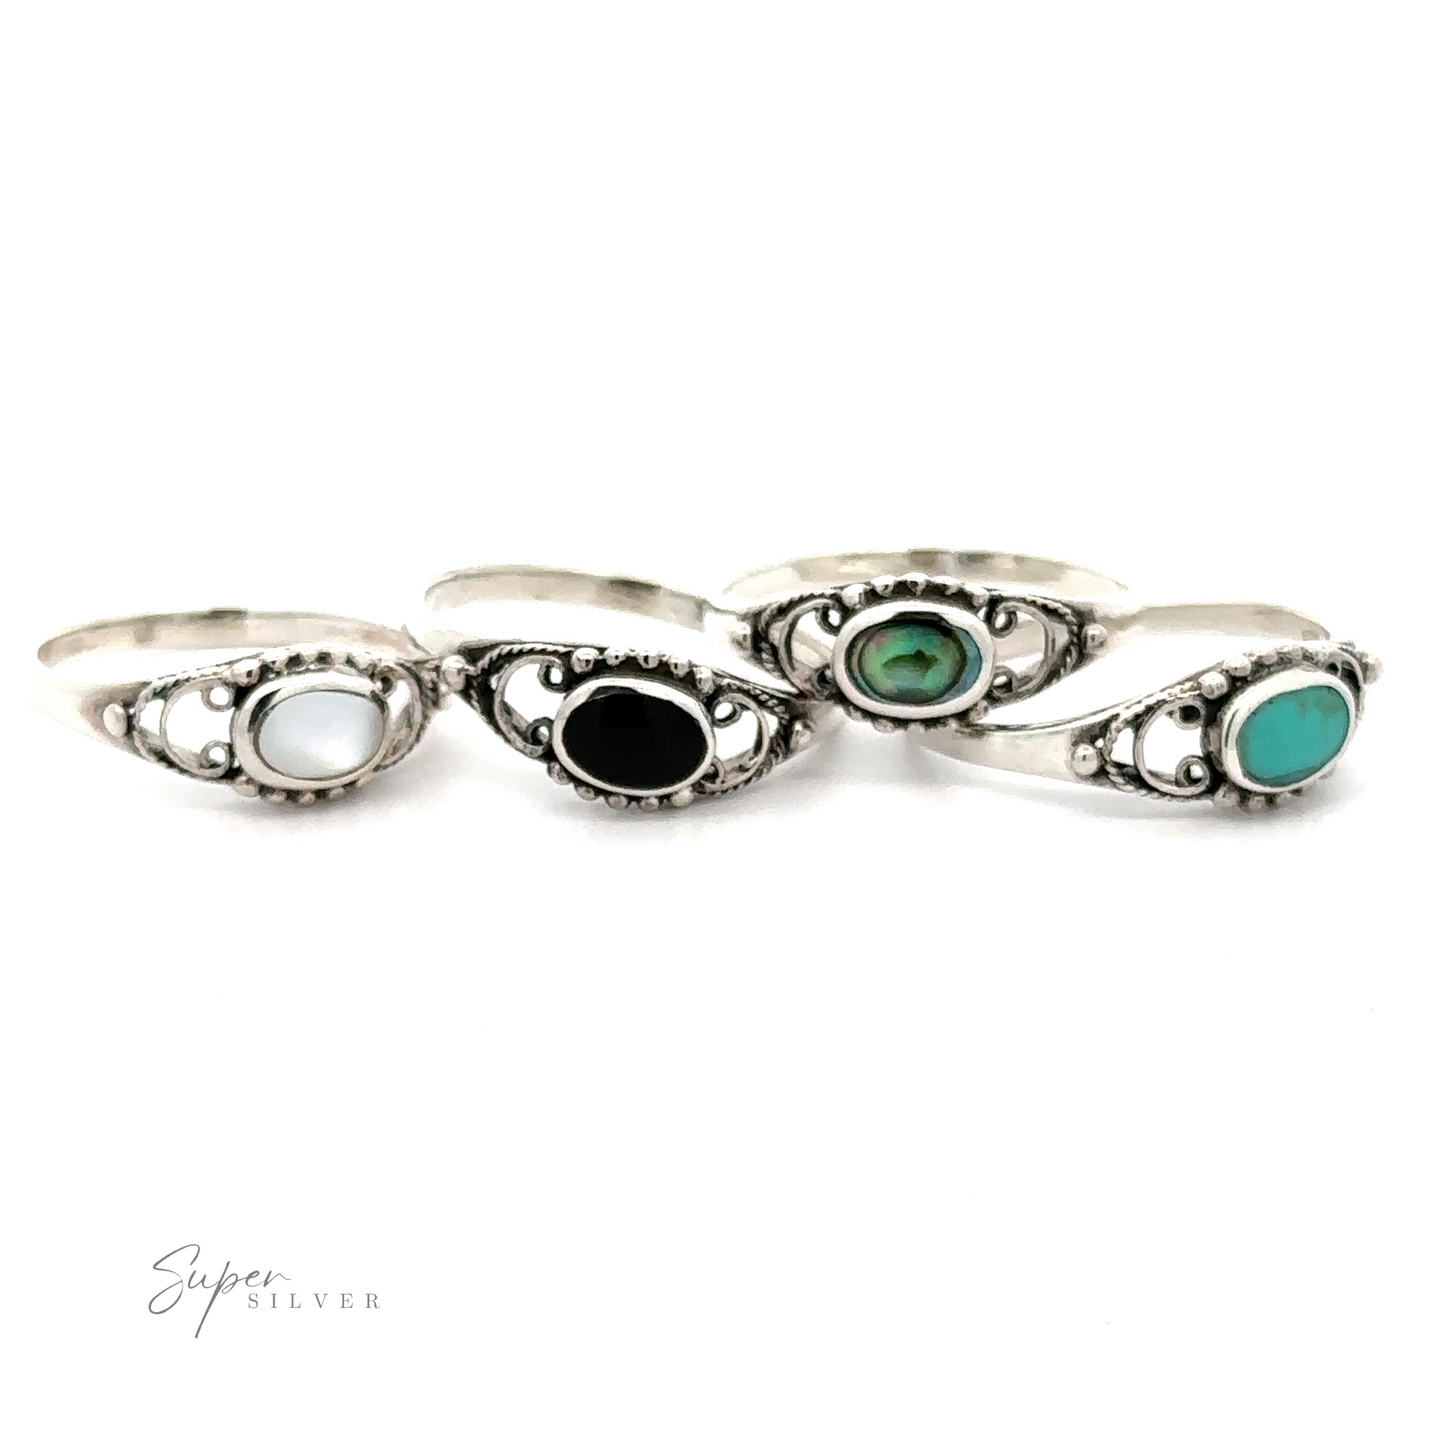 Four Oval Stone Rings With Delicate Border in a ball pattern that includes black and green stones.